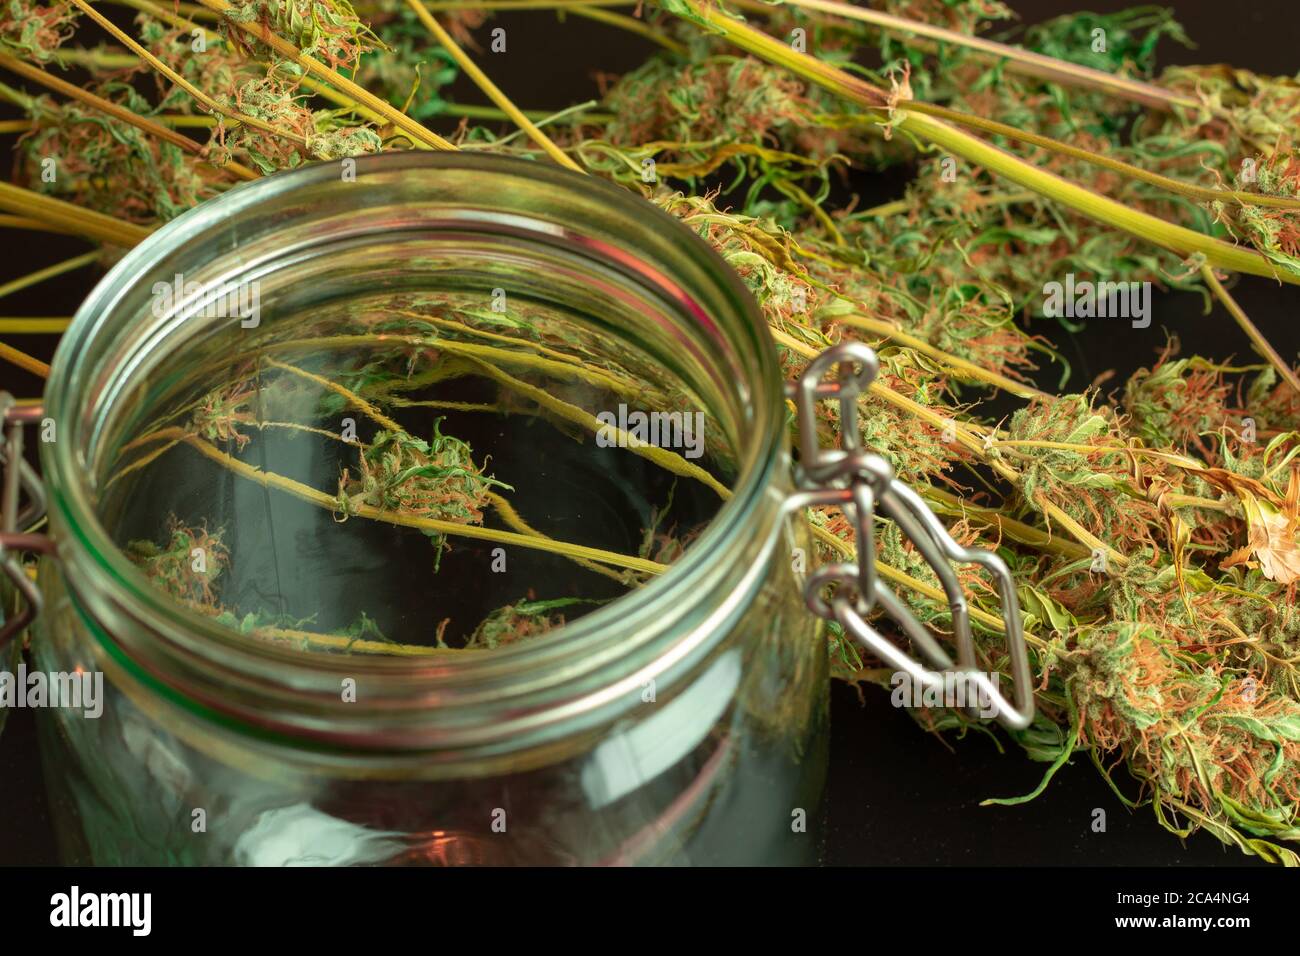 Cannabis or Marijuana Business Industry concept illustration. Weed plants with buds on blurry background. Open empty glass jar Stock Photo